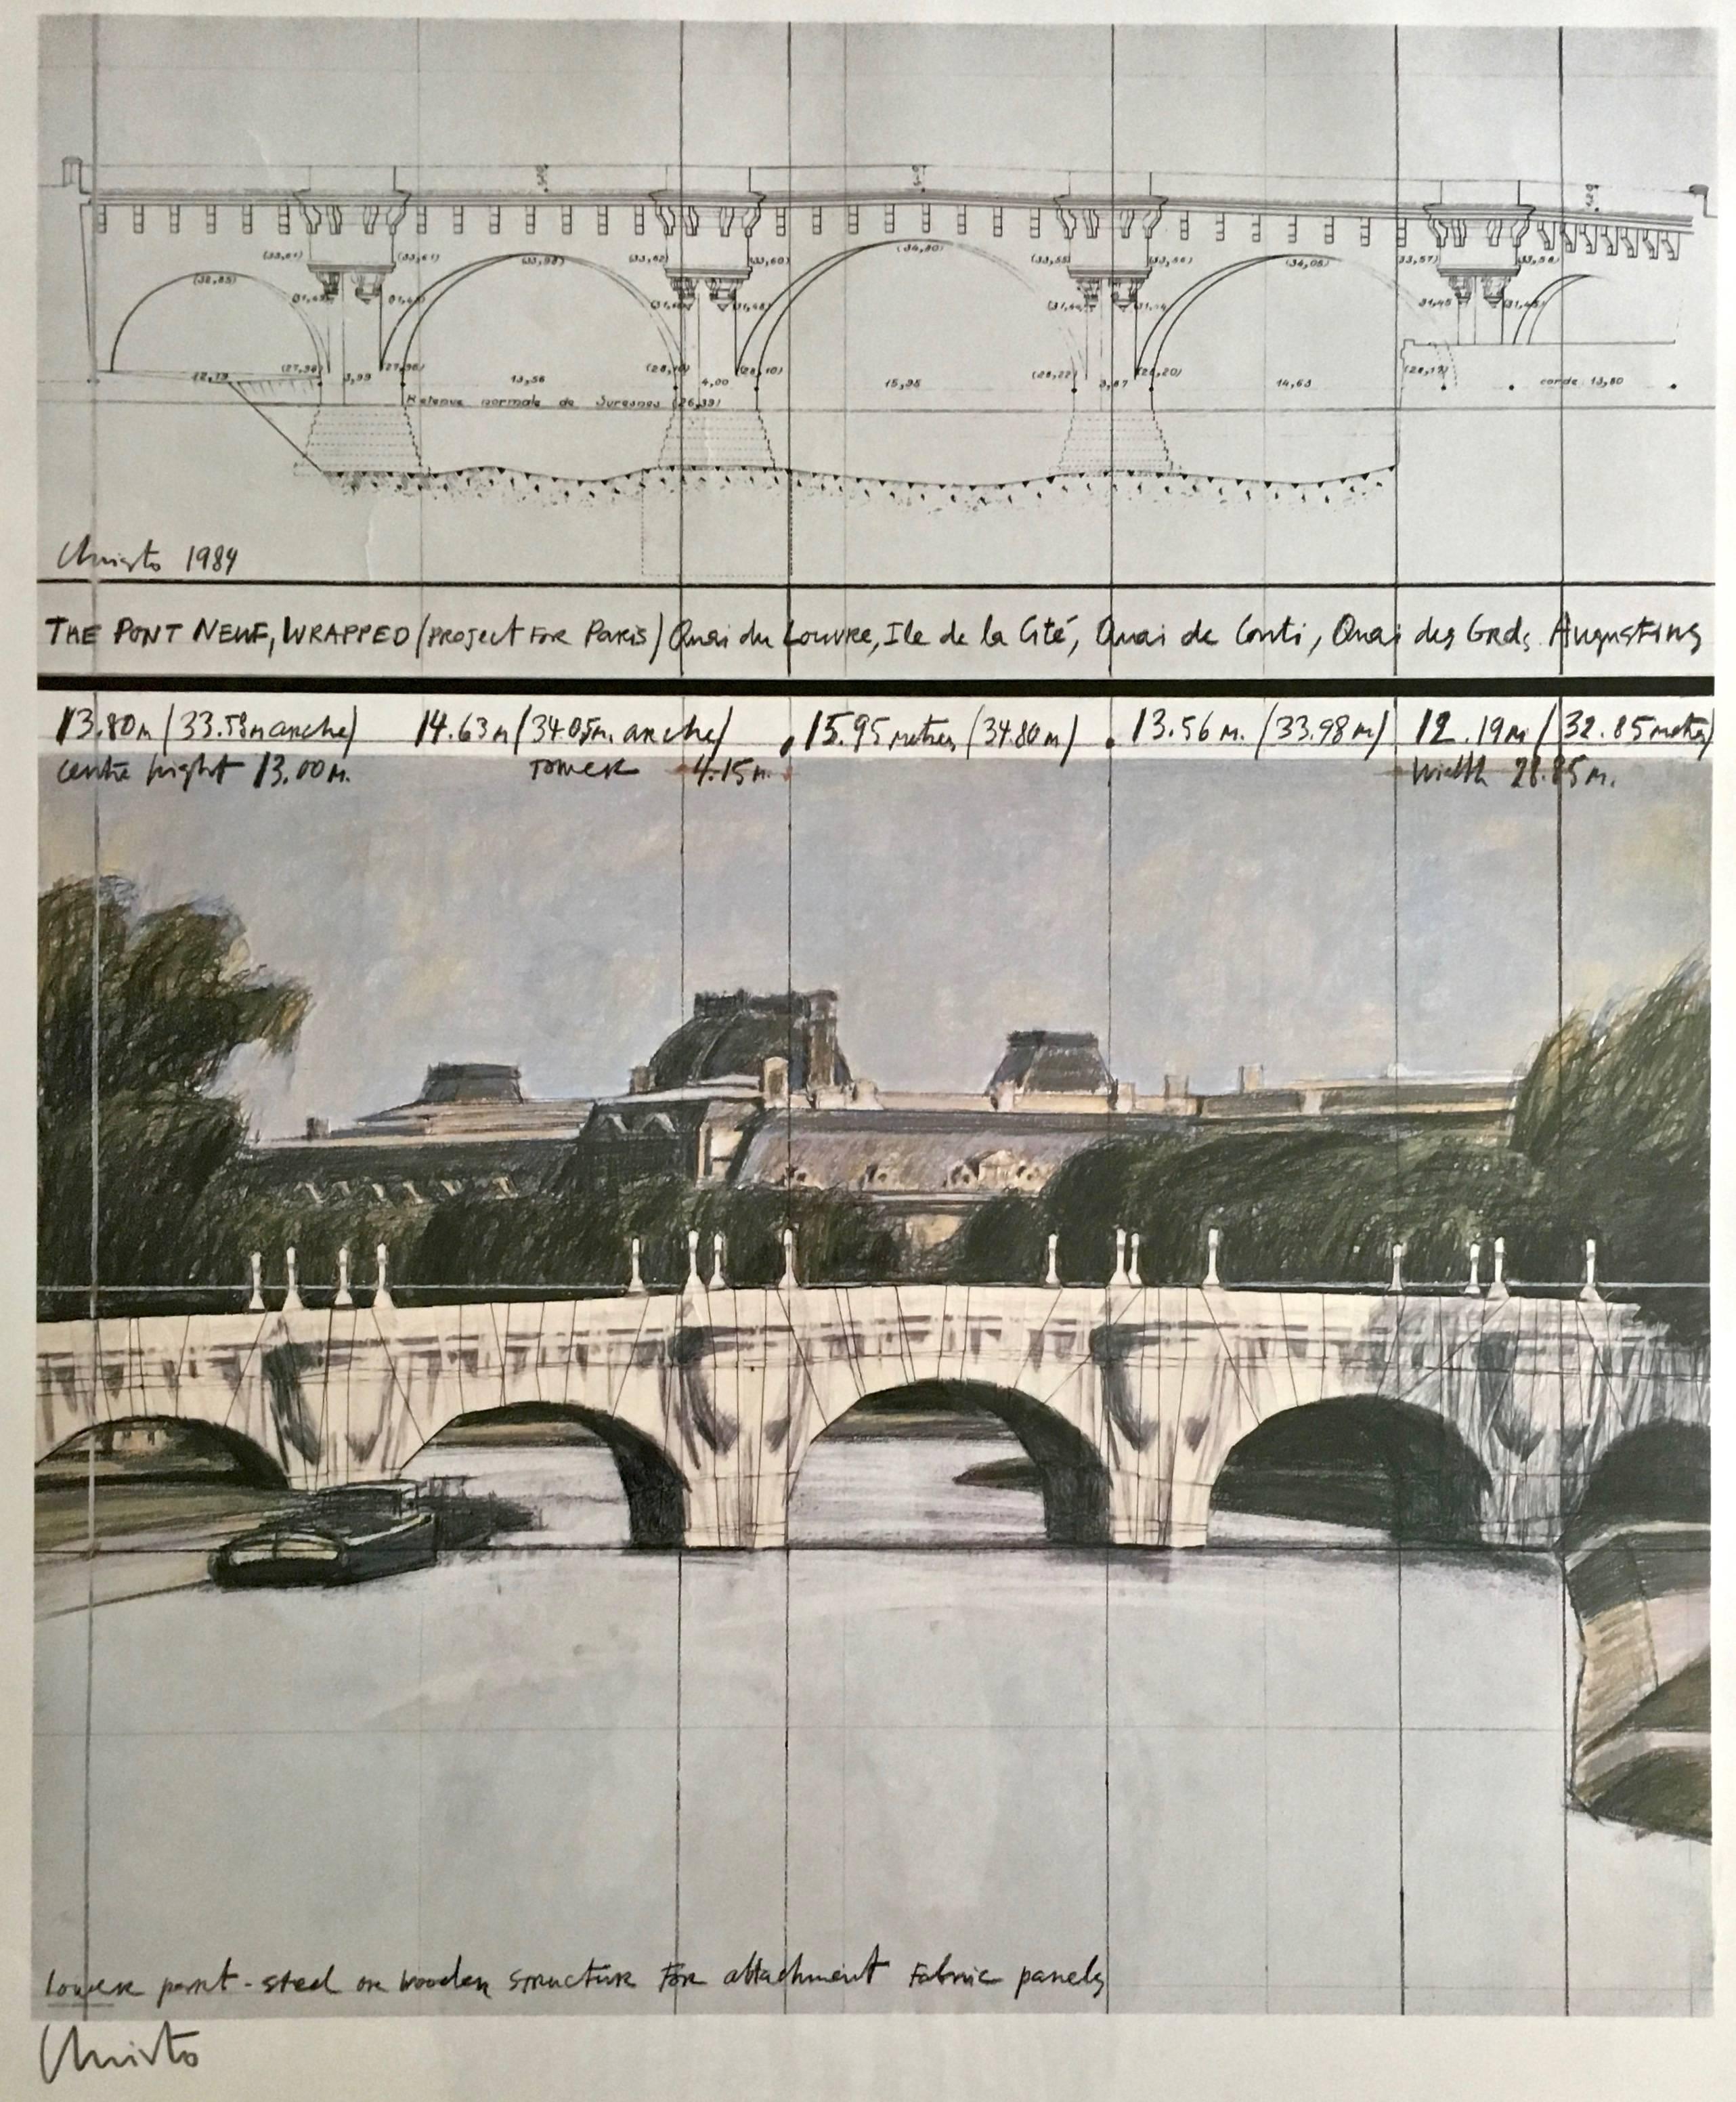 Christo (b.1935) Le Pont-Neuf, 1984 offset color lithograph on vellum paper, signed and framed.

In 1985, Christo and Jeanne-Claude wrapped the Pont-Neuf, the oldest bridge in Paris. The artists' vision for the project was conceived in 1975. It